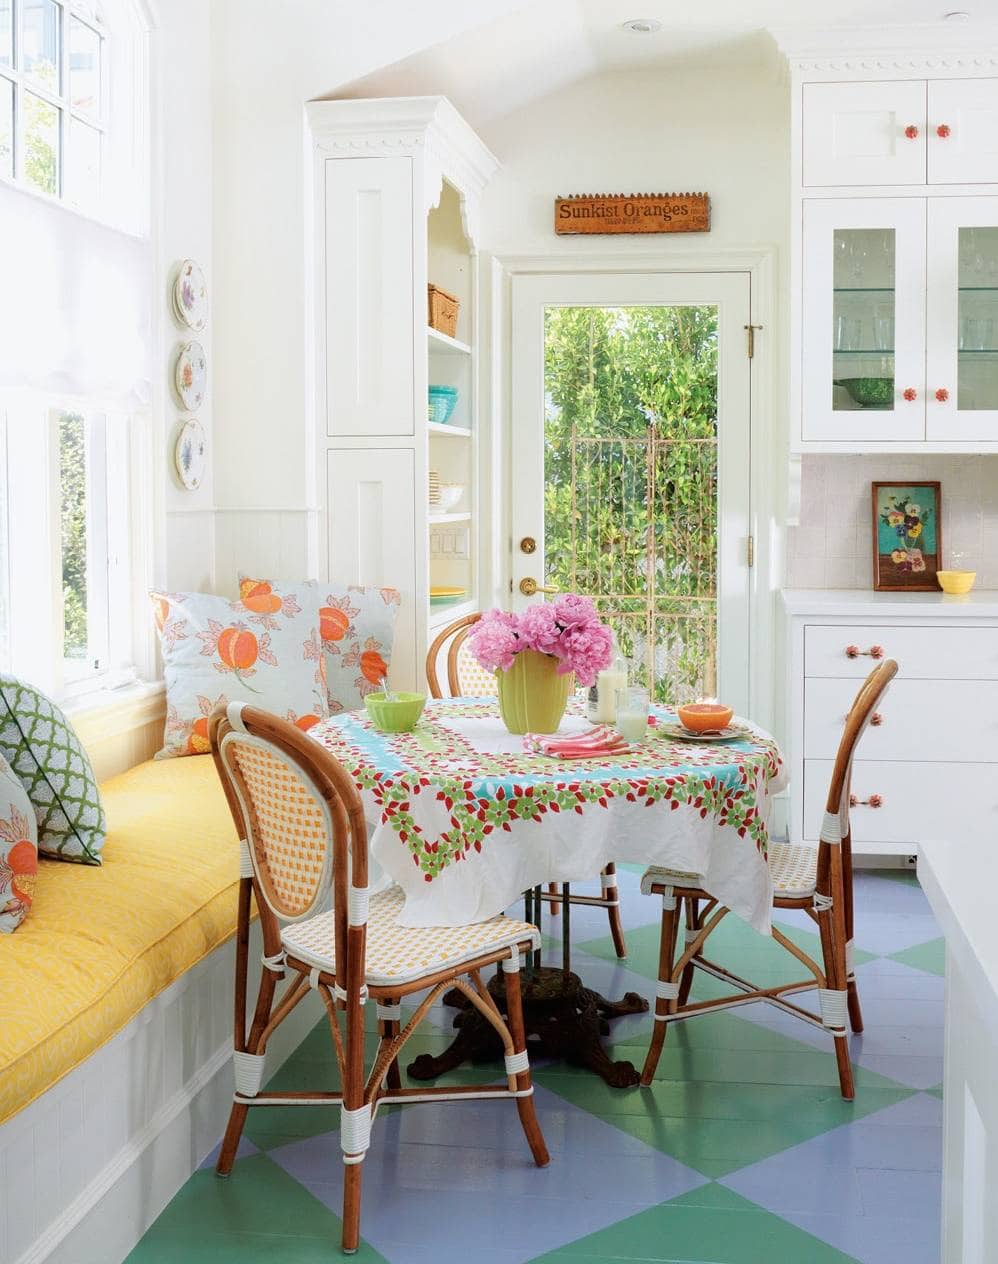 Breakfast nook in beach english cottage style featuring yellow window seat